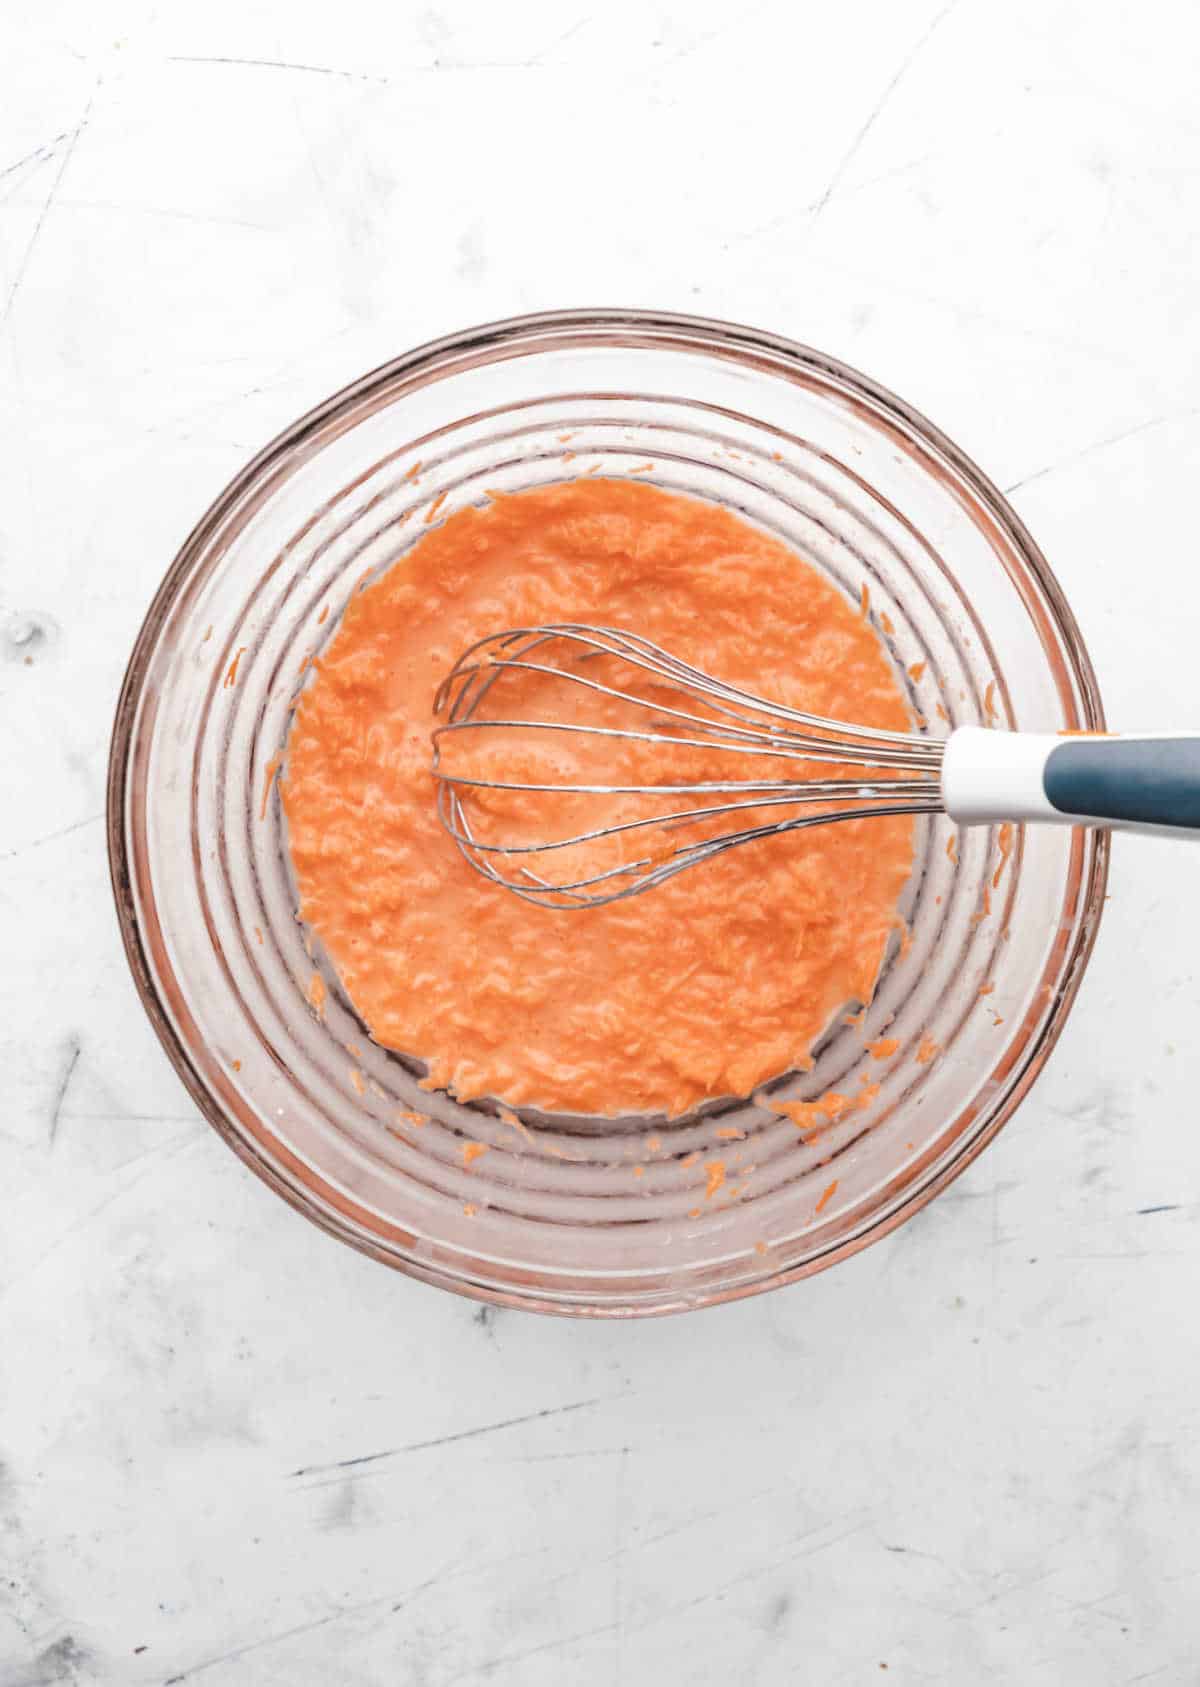 Shredded carrot whisked into wet ingredients in a glass mixing bowl. 